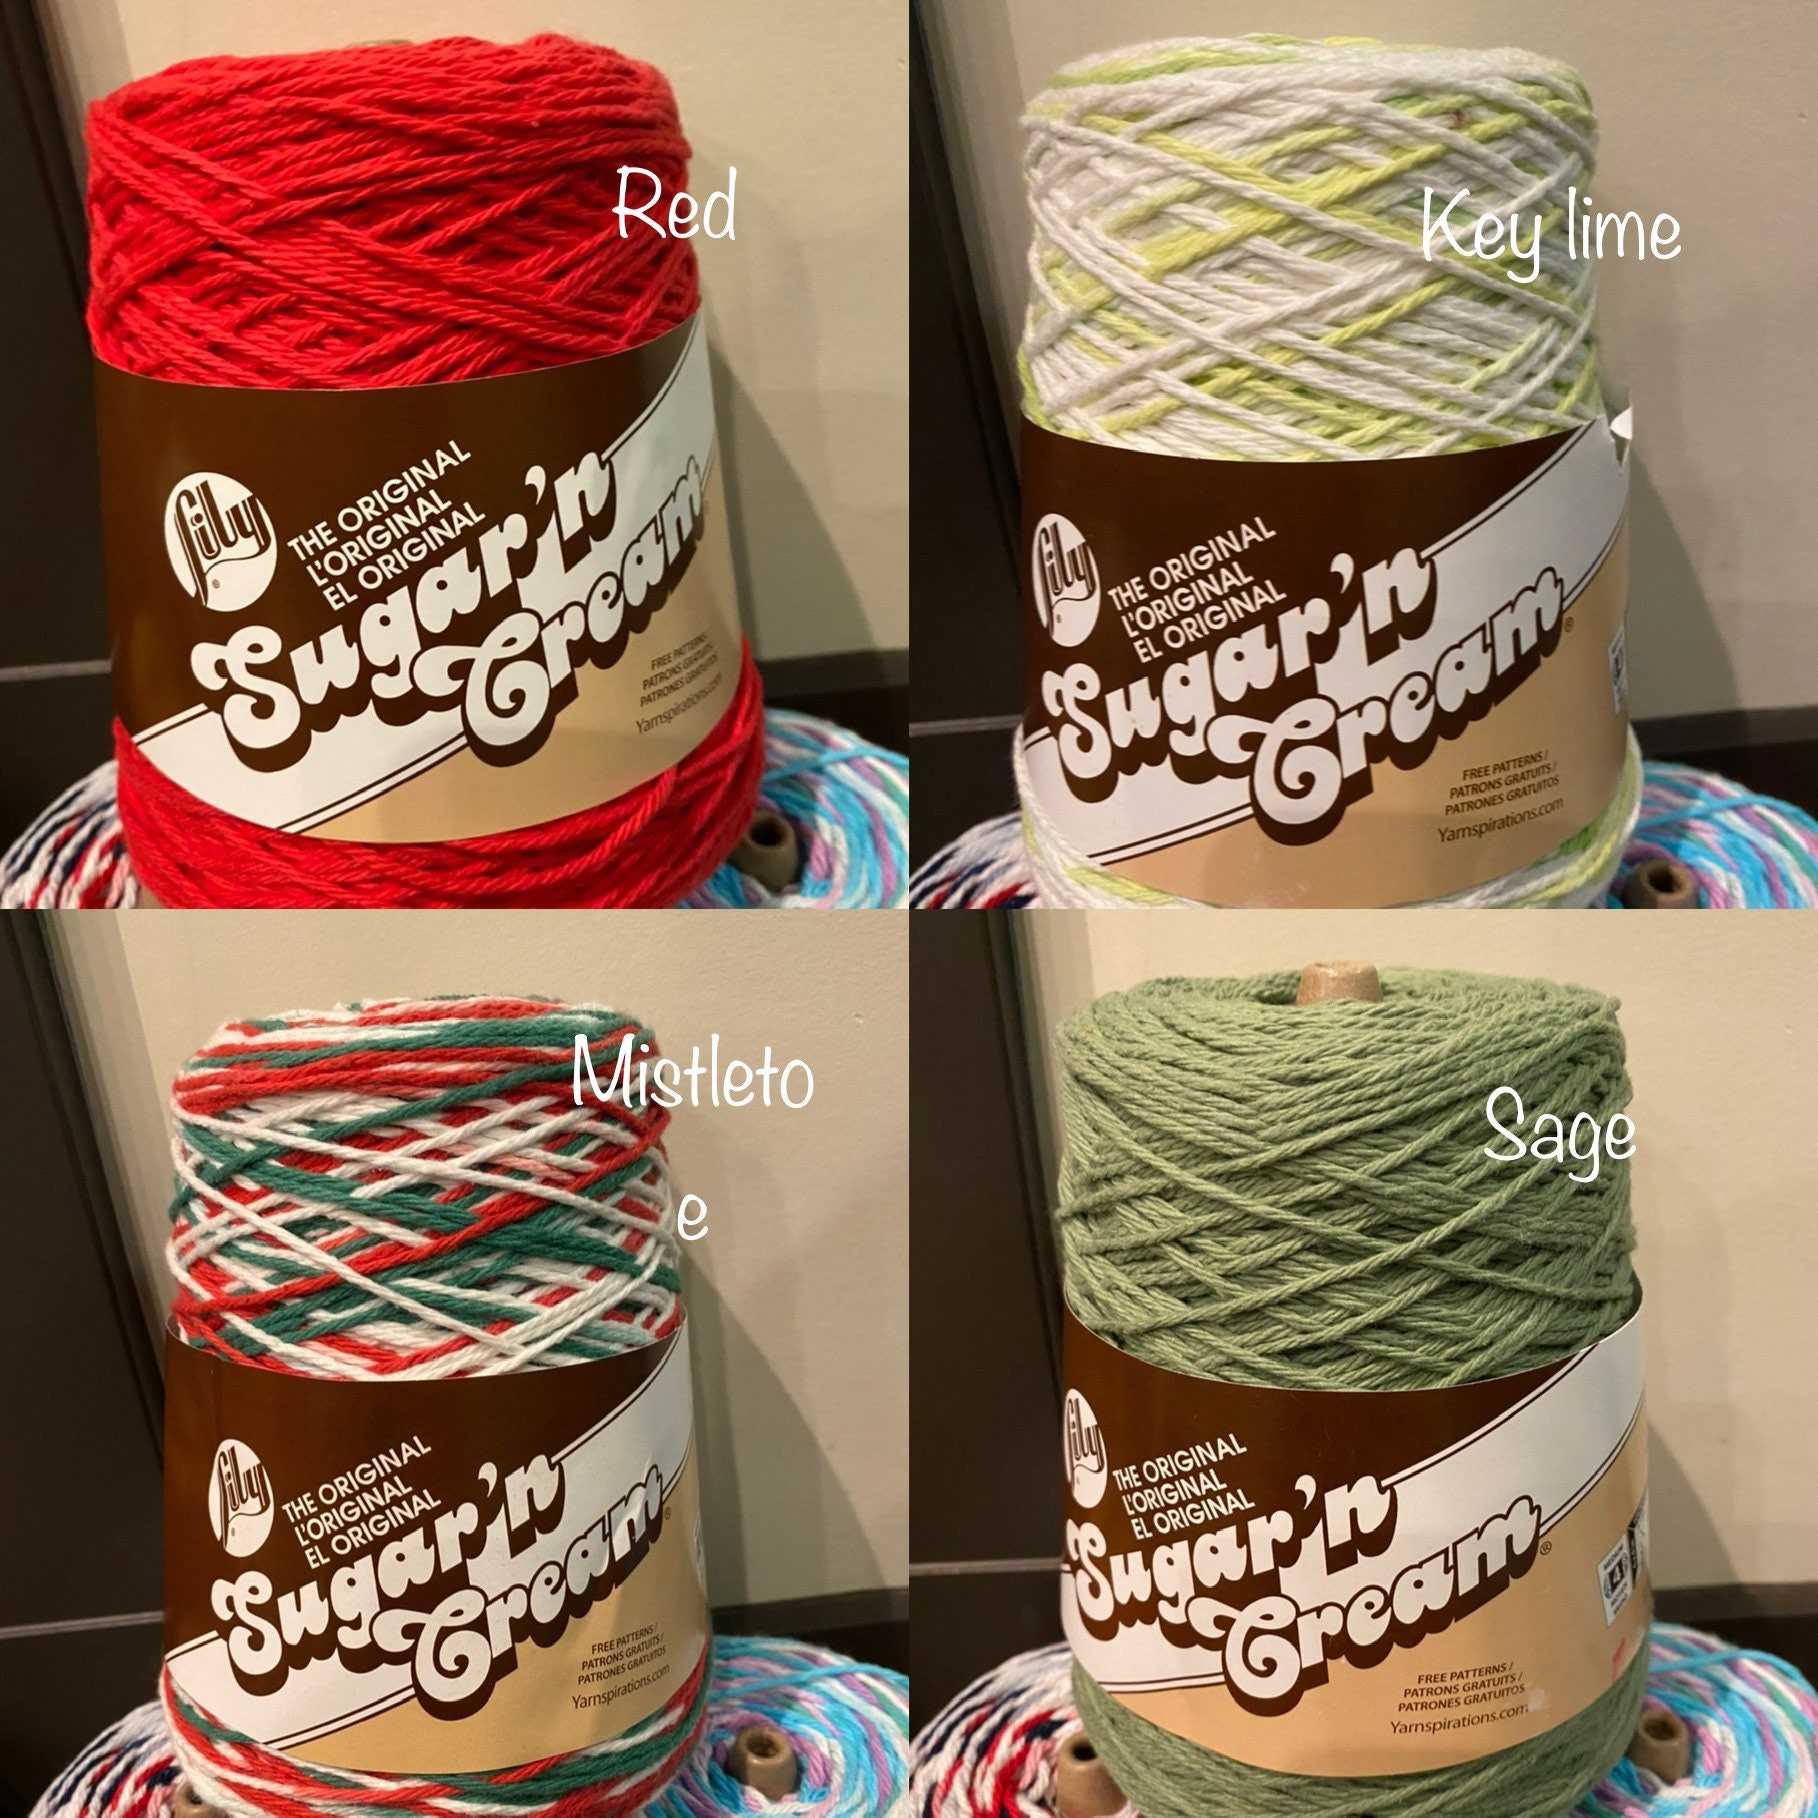 SAGE - 14oz  674 yards Cone. Lily Sugar N Cream Cotton yarn. 100% cotton.  Great for dishcloths and more!